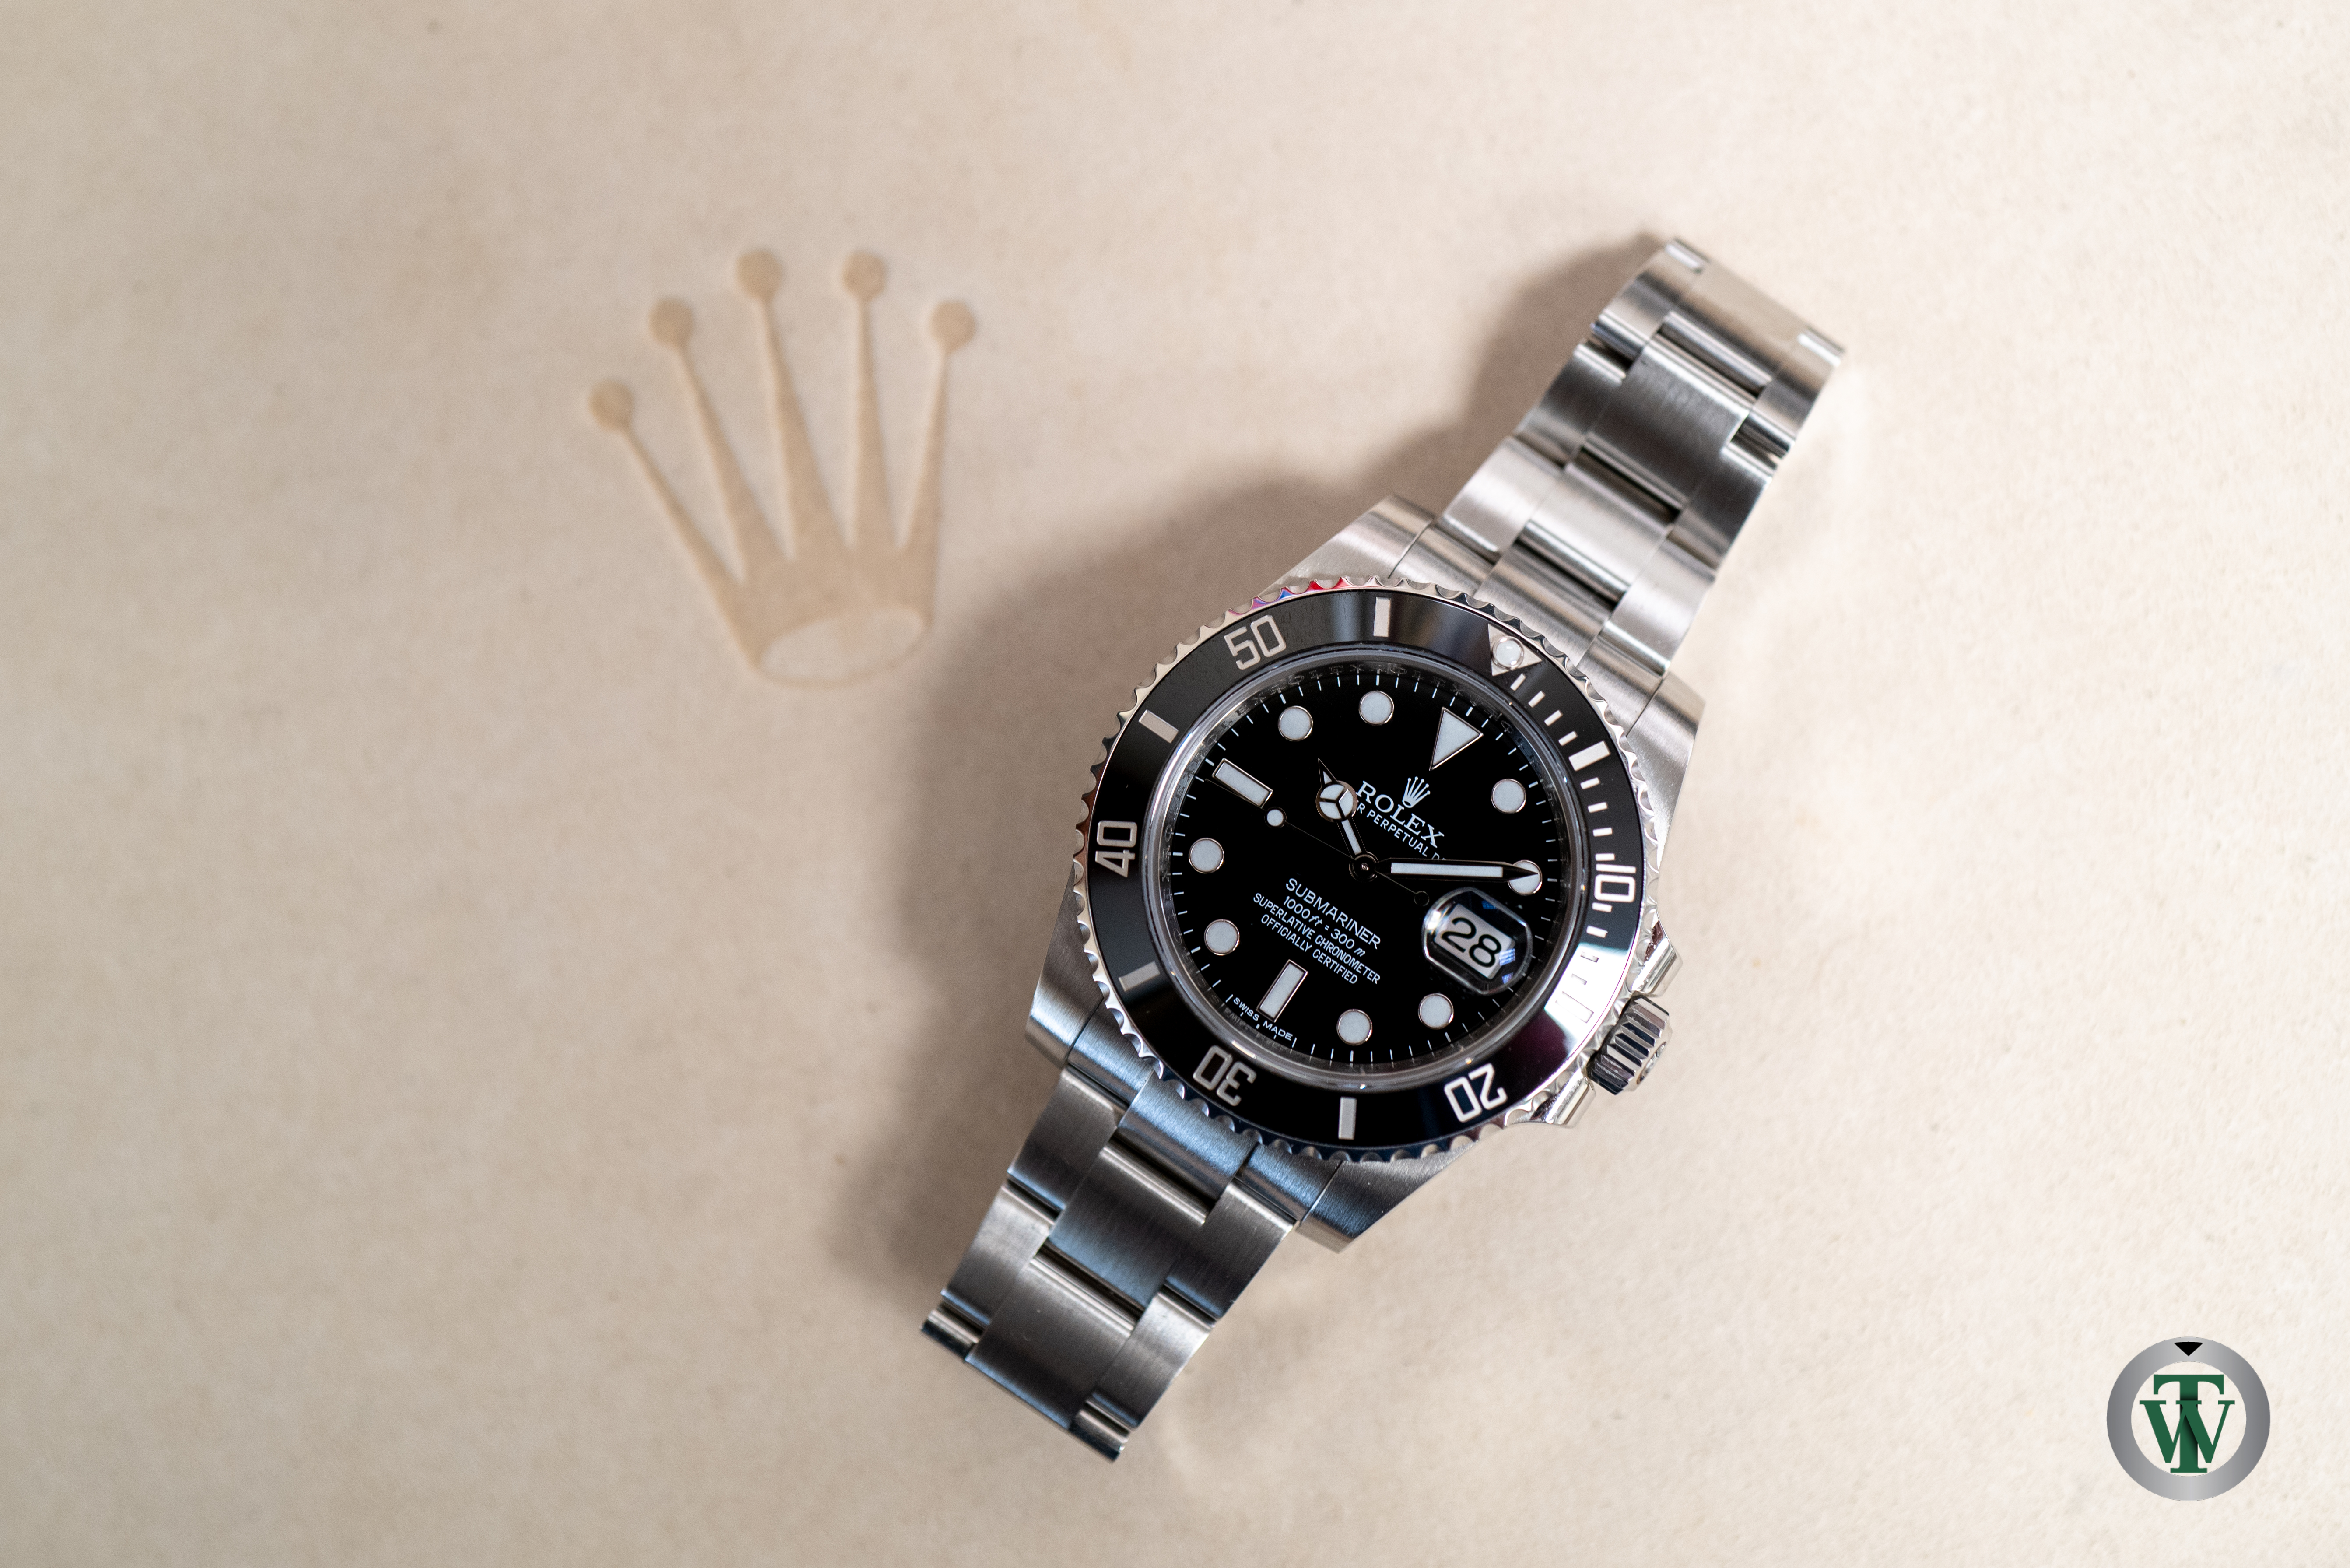 Rolex Submariner 116610LN - Black Dial - 2013 Approx